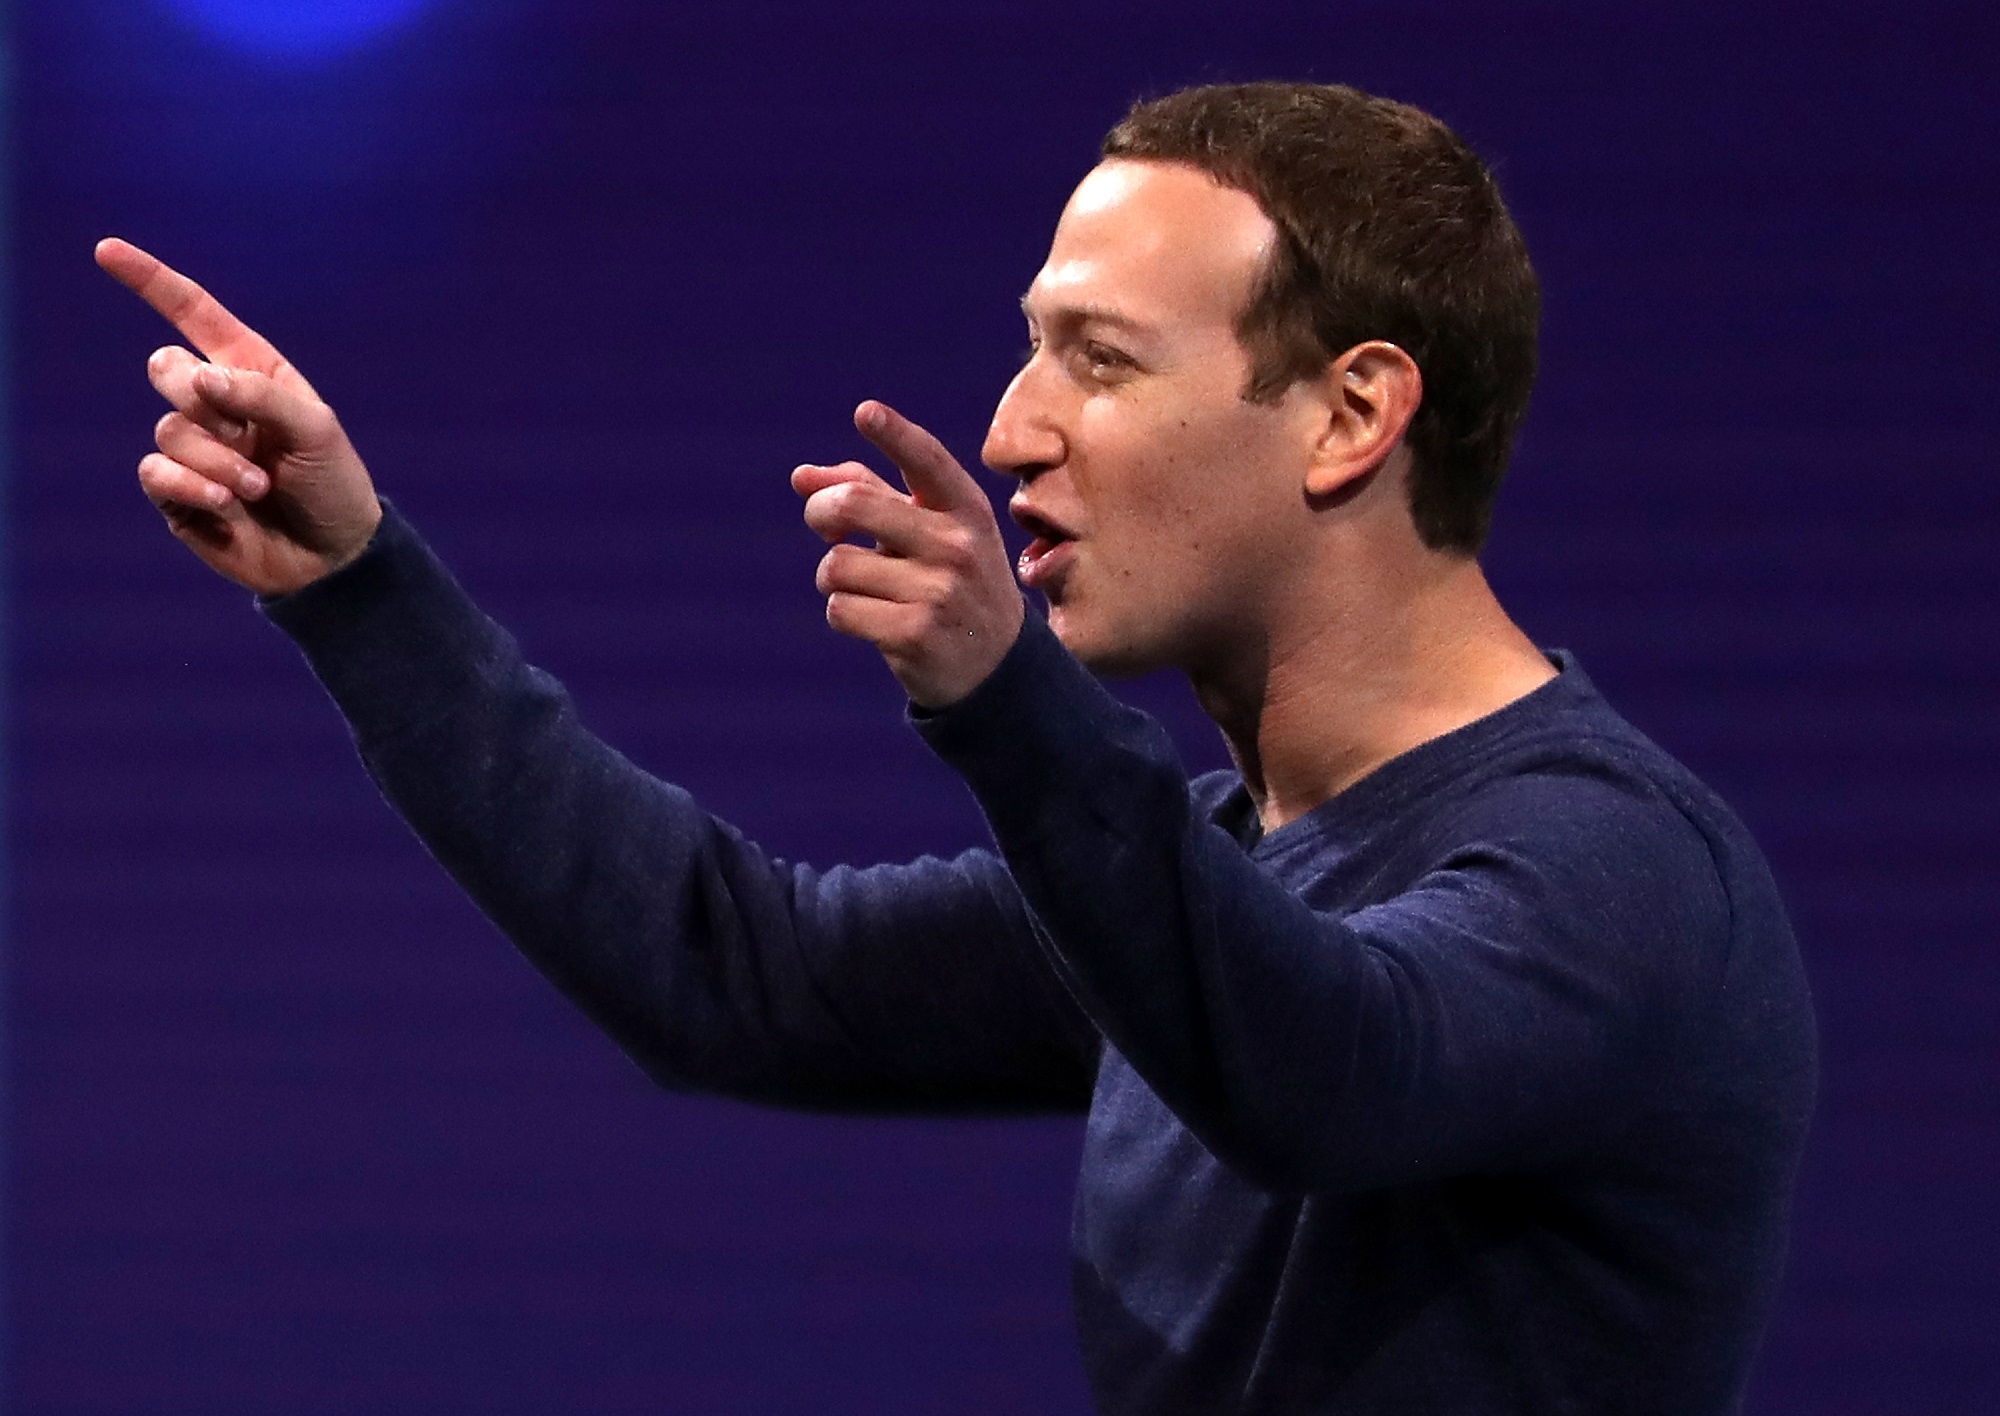 Facebook's Libra cryptocurrency could potentially reach 2.6 billion users. The company hasn't exactly earned that level of trust.